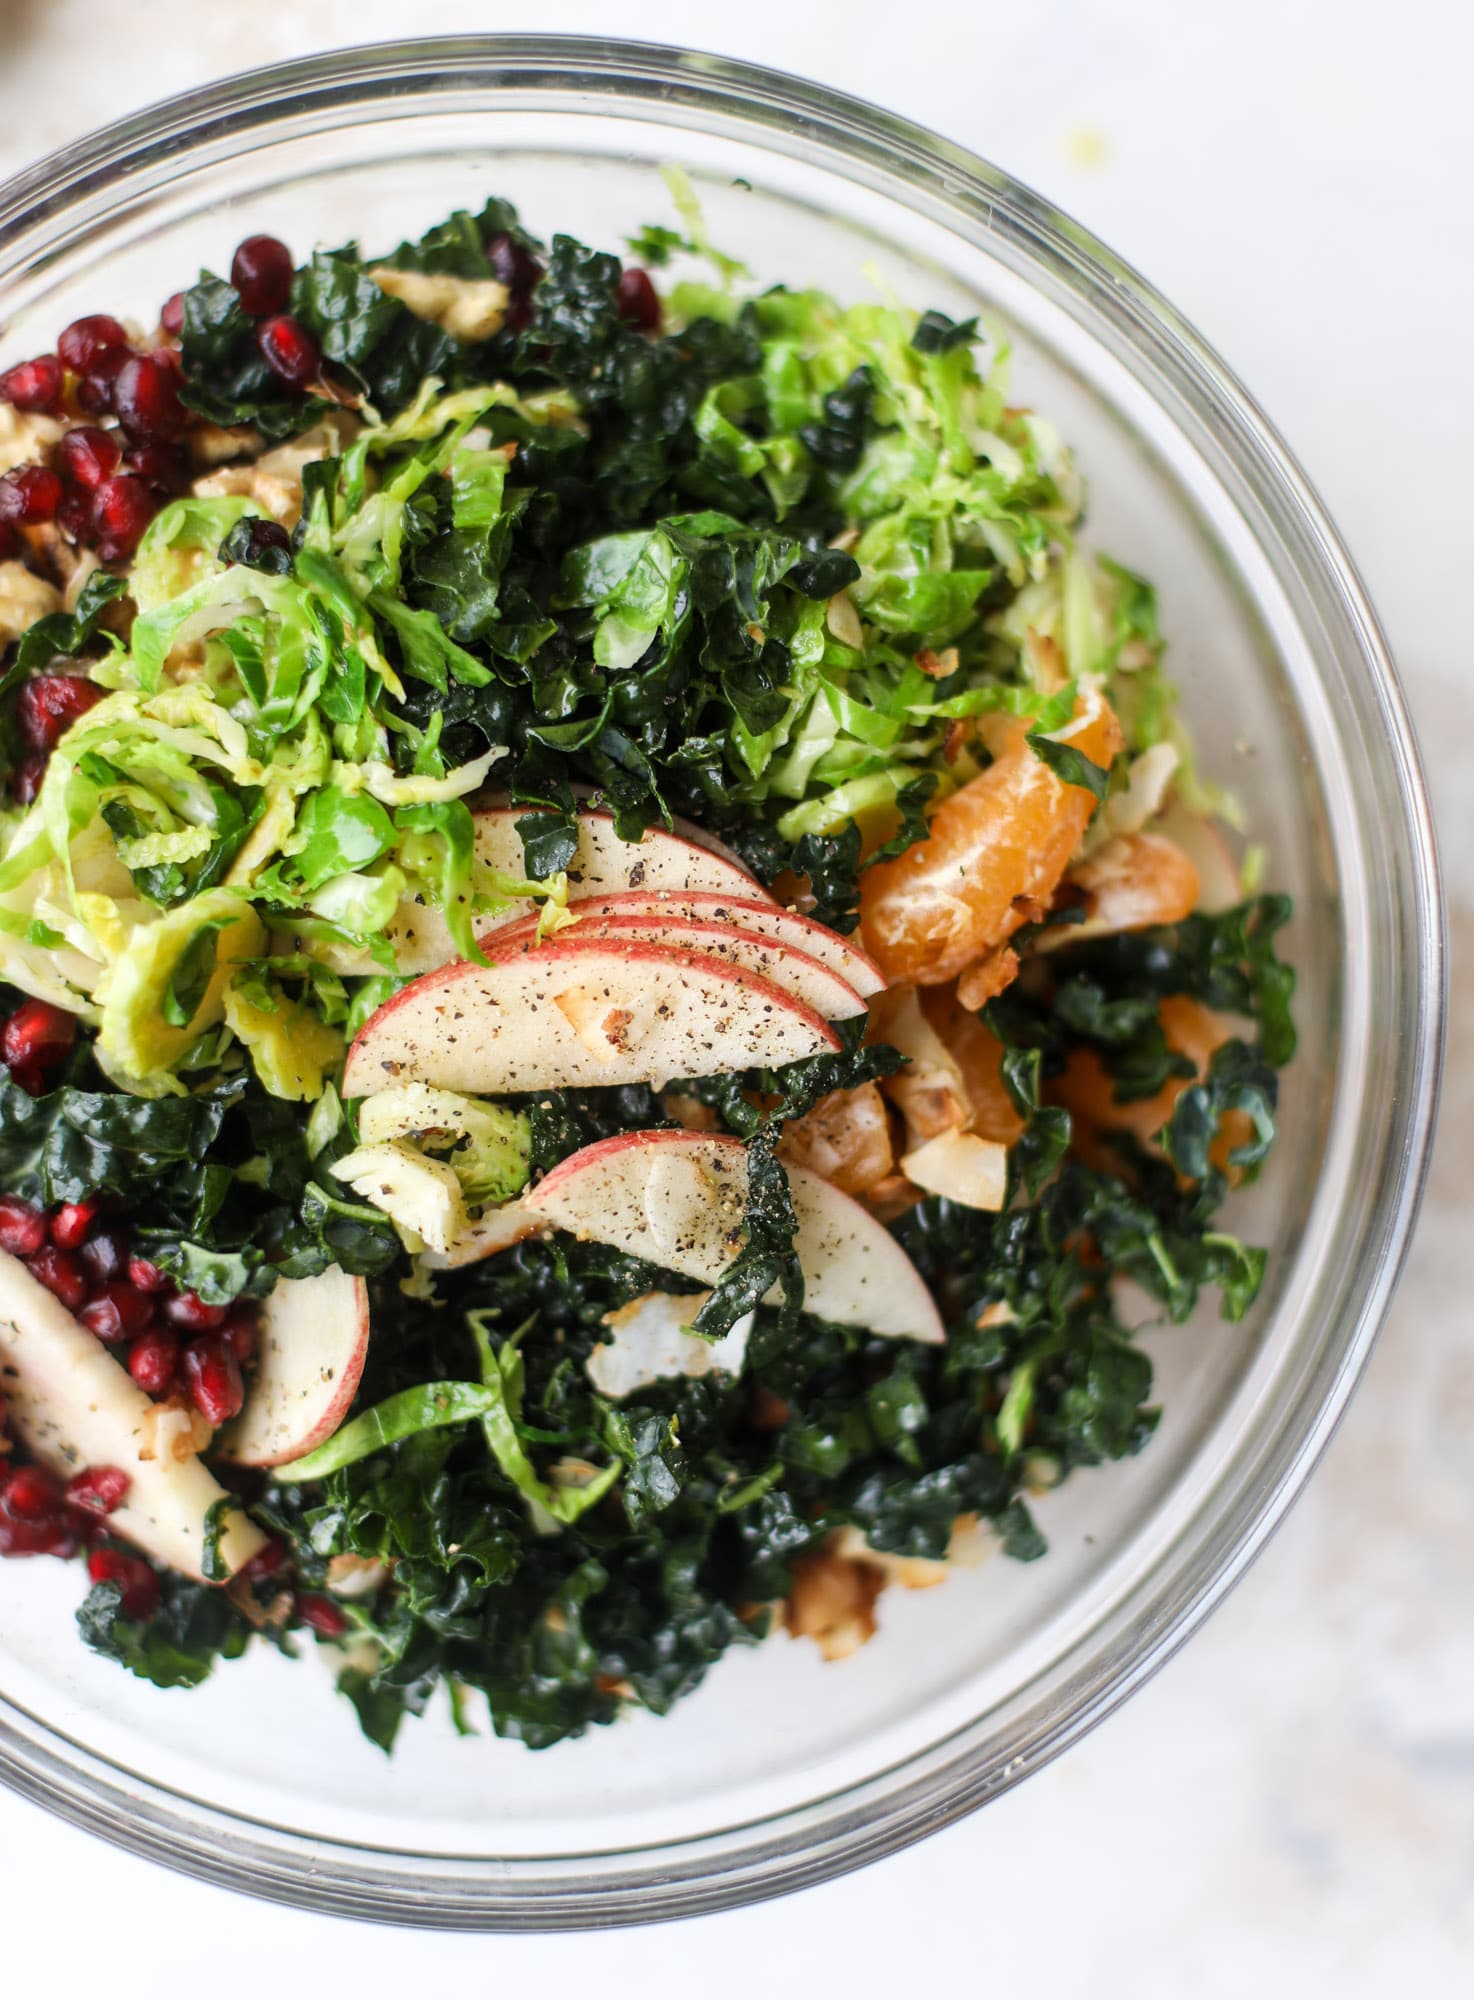 This winter crunch salad is loaded with tons of delicious, crunchy seasonal ingredients. A base of brussels sprouts and kale is topped with sliced apples, satsuma wedges, pomegranate arils, toasted walnuts and savory flaked coconut crunch. Delish! I howsweeteats.com #winter #salad